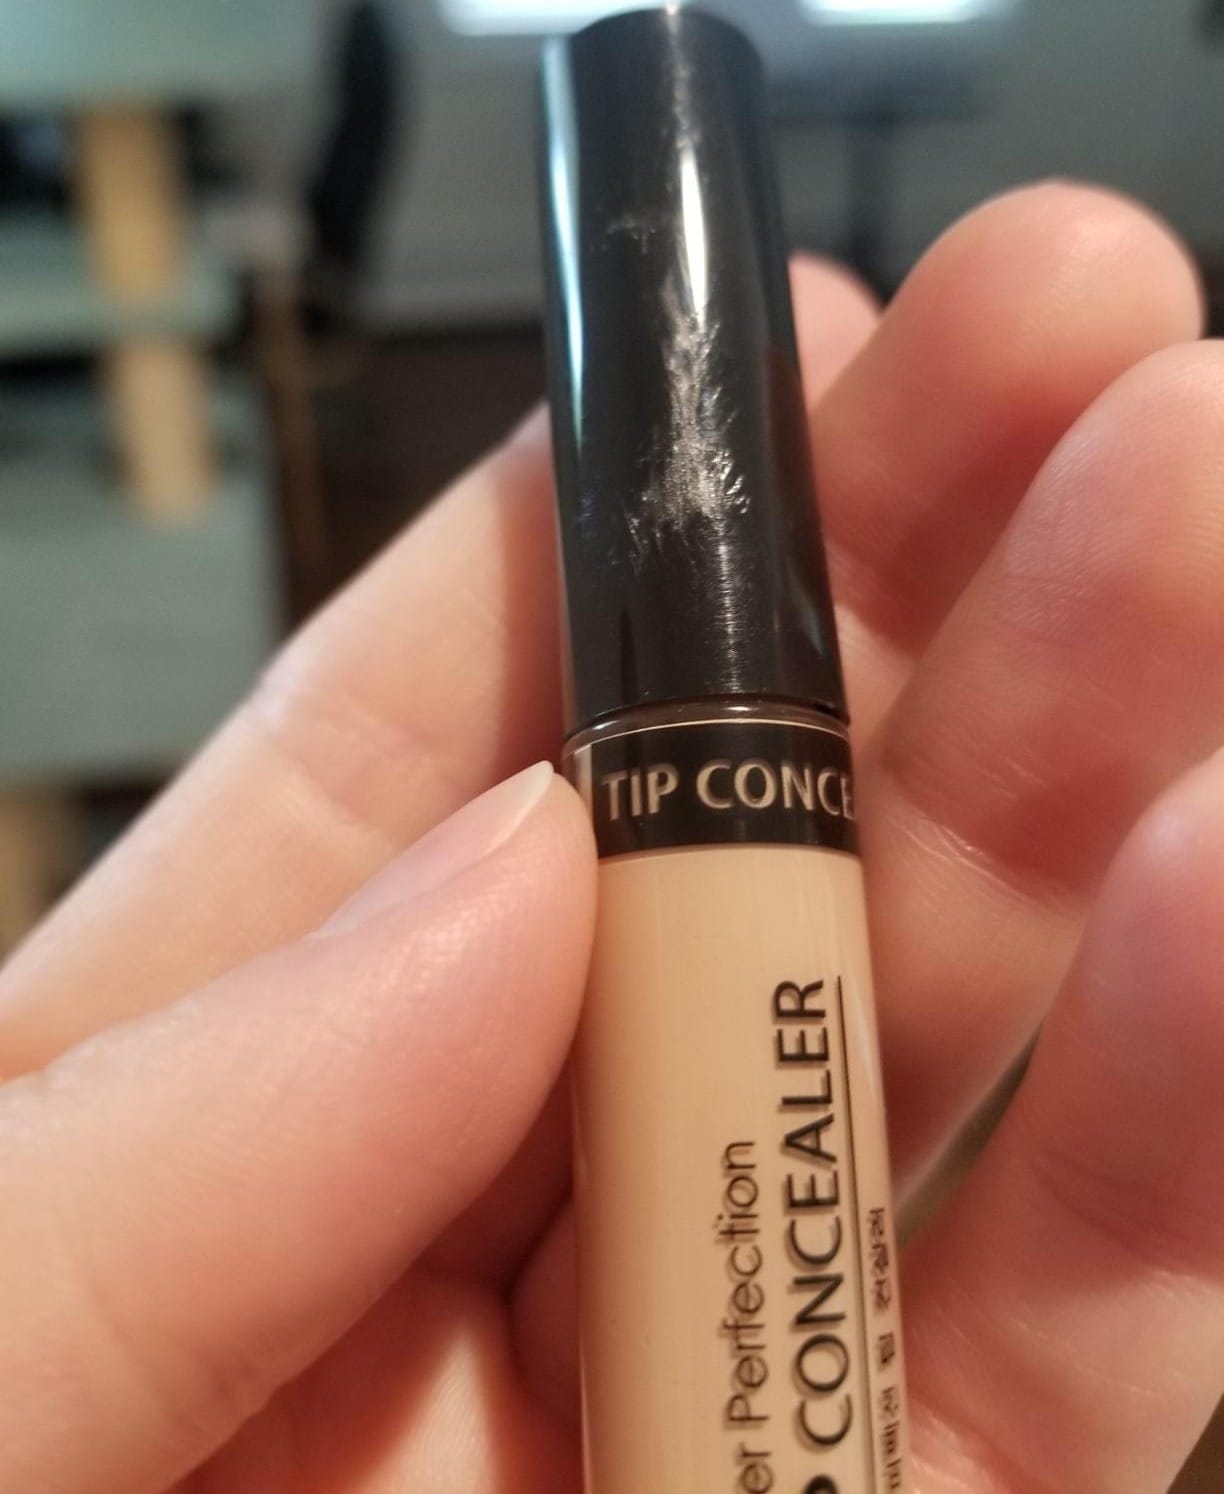 Unveiling the NYX Concealer Serum: A Game-Changer for Flawless Skin